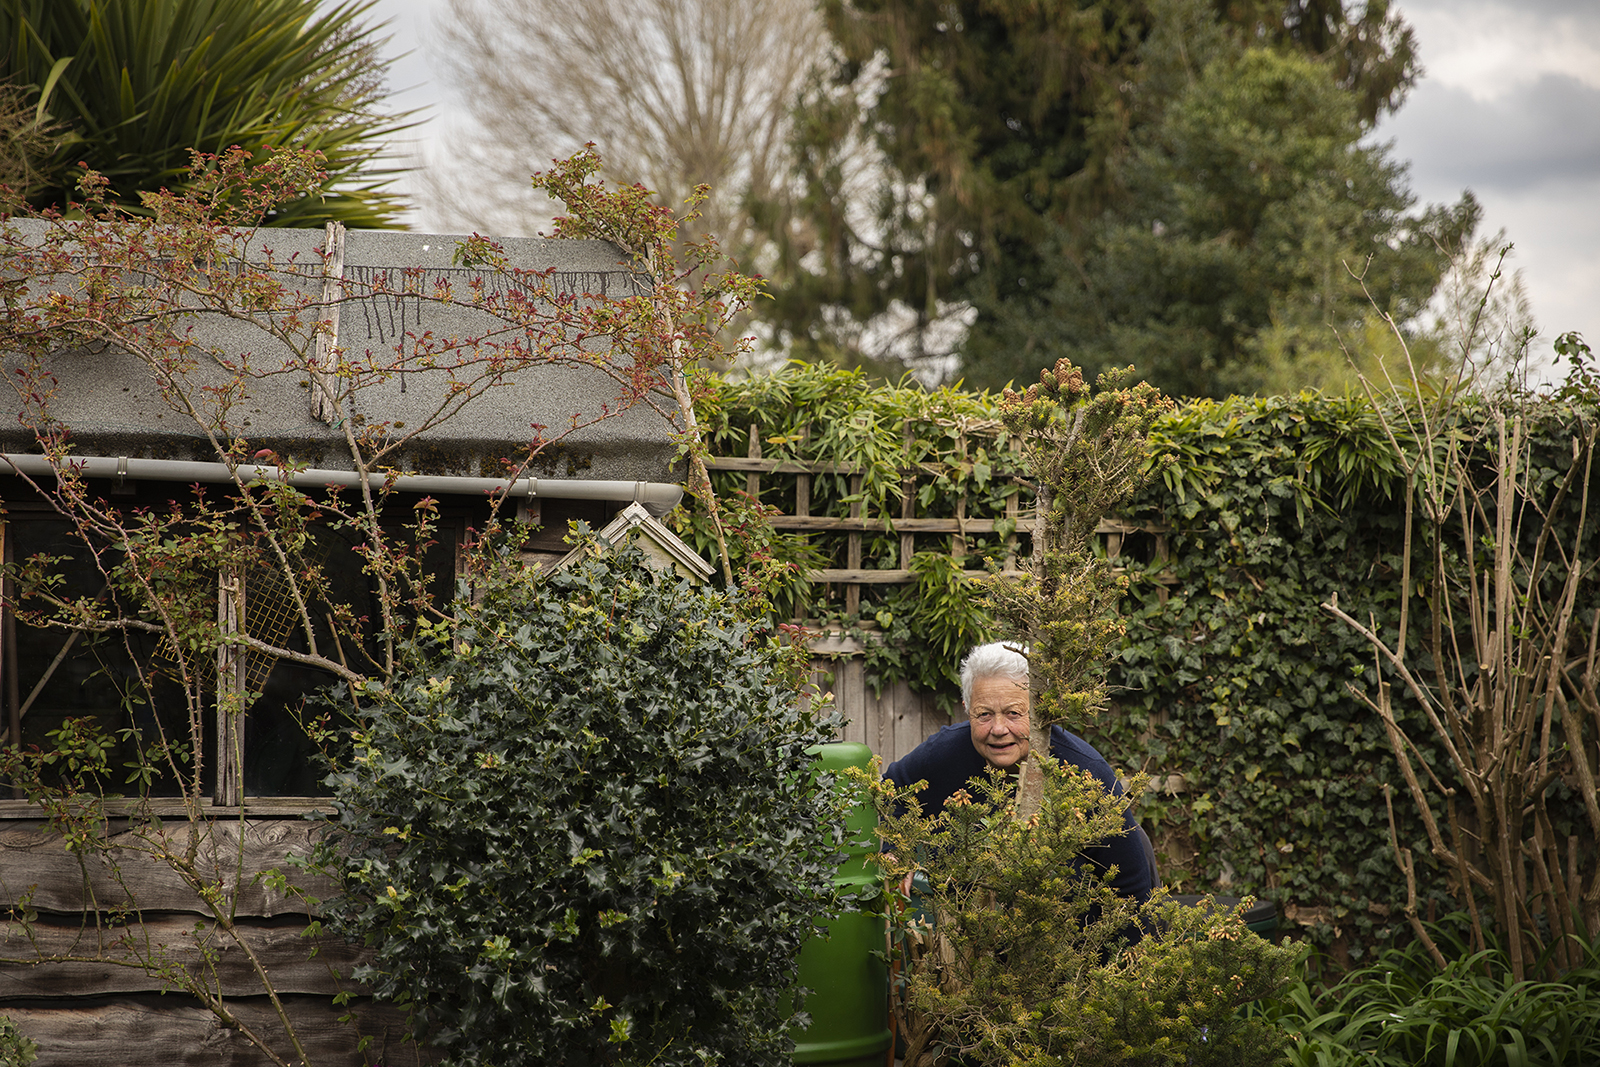 This image by BA Photography Student, Isabella Lamorna, shows her Grandma in her garden.